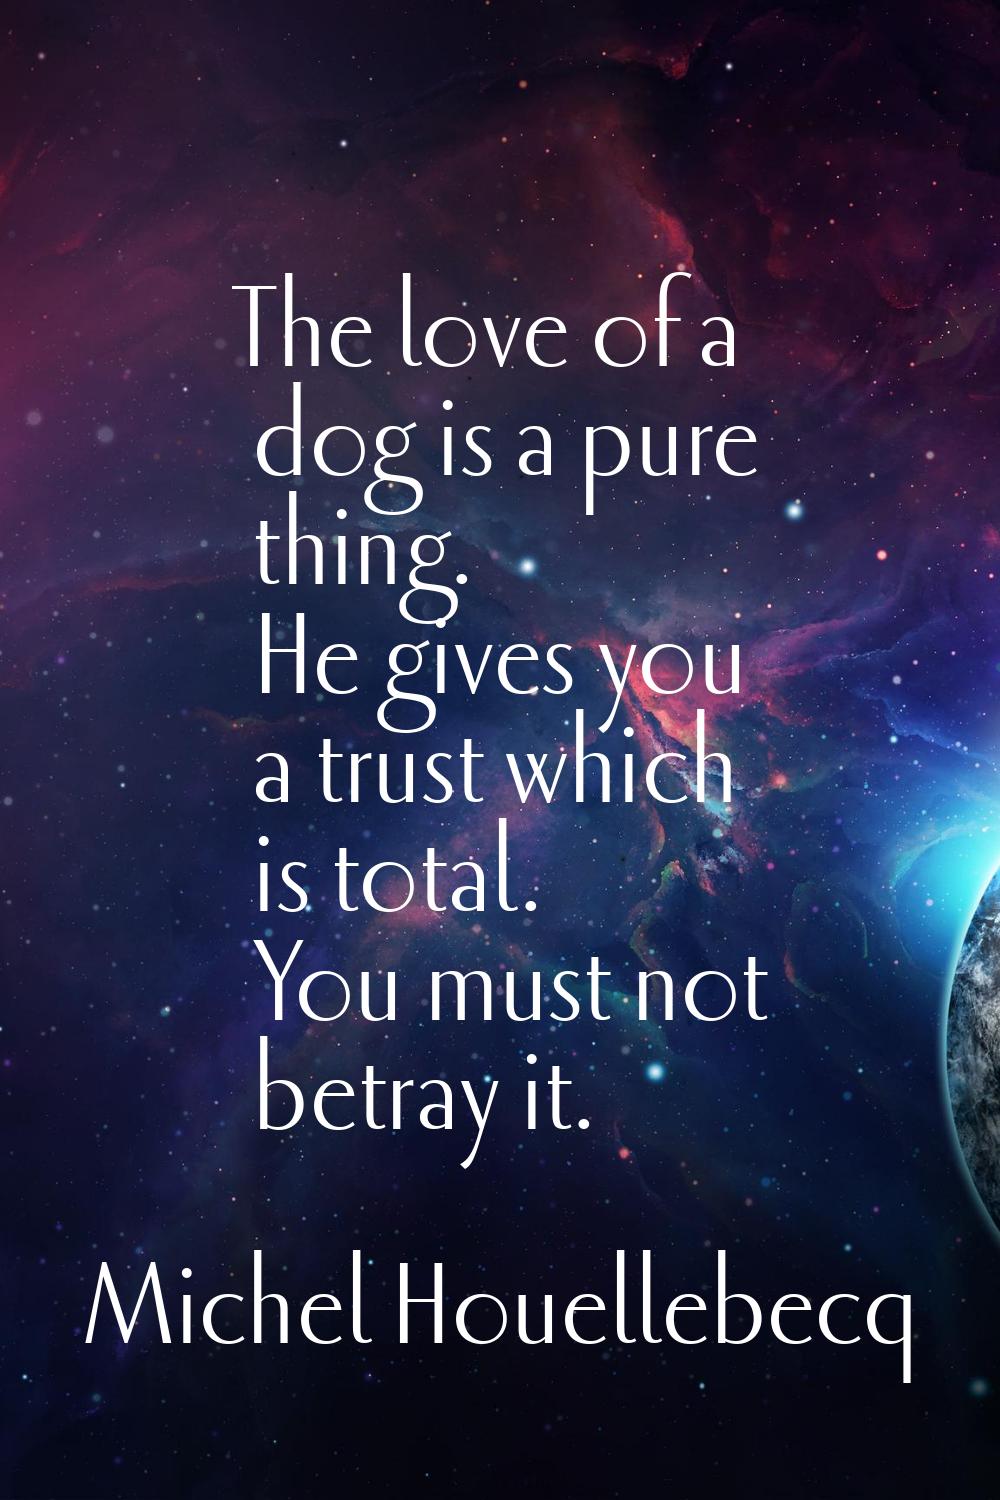 The love of a dog is a pure thing. He gives you a trust which is total. You must not betray it.